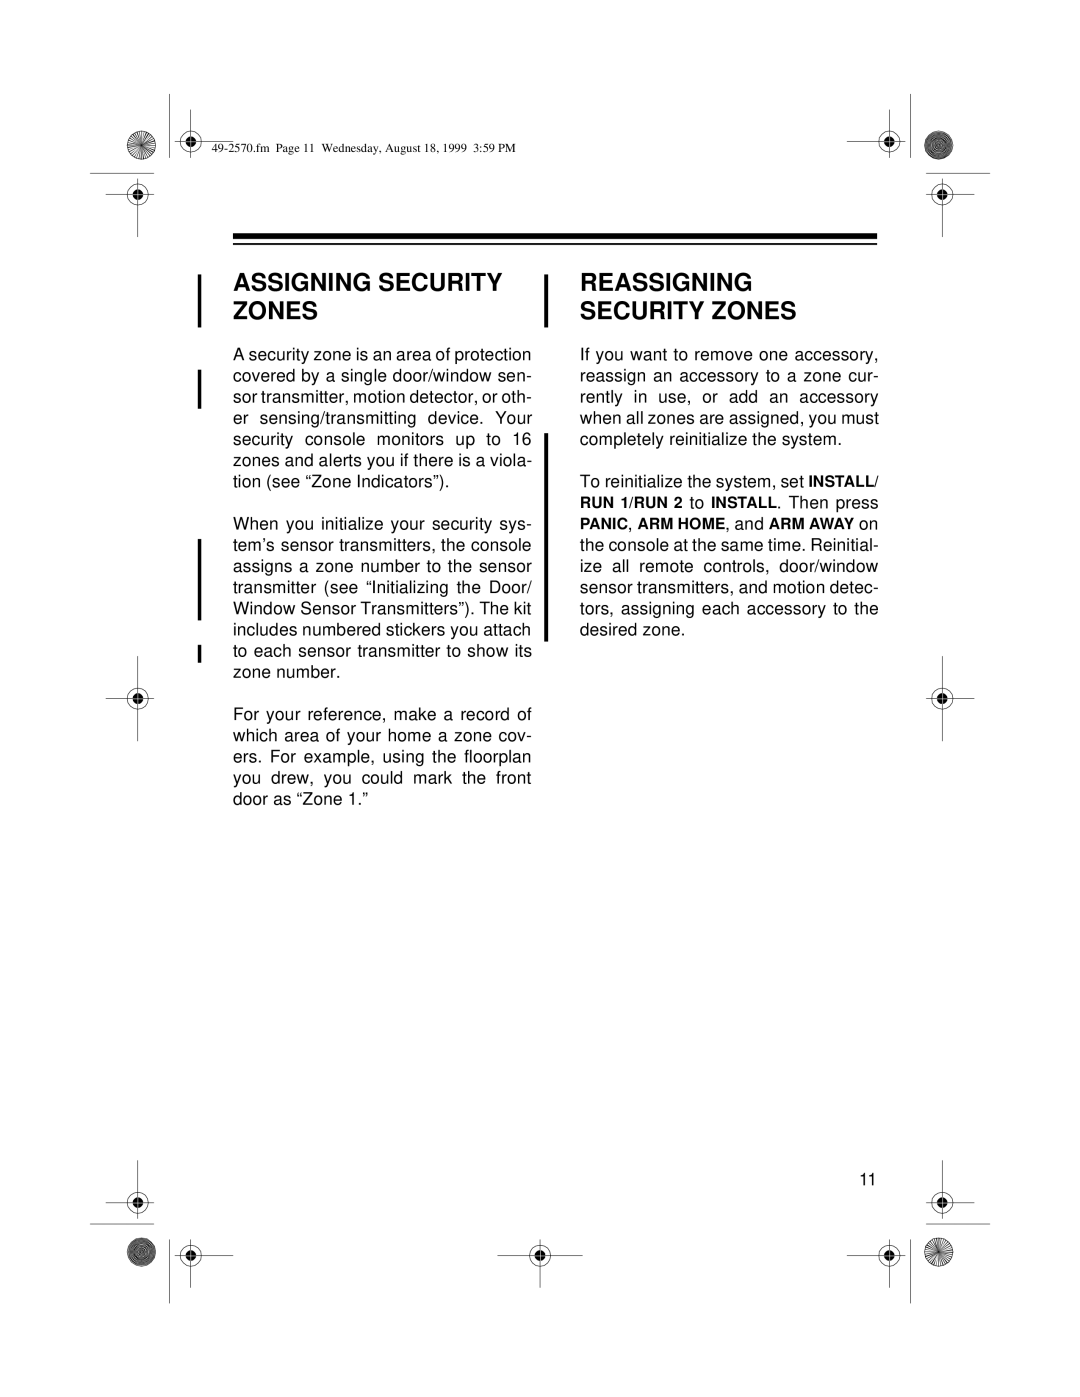 Radio Shack 49-2570 owner manual Assigning Security Zones, Reassigning Security Zones 